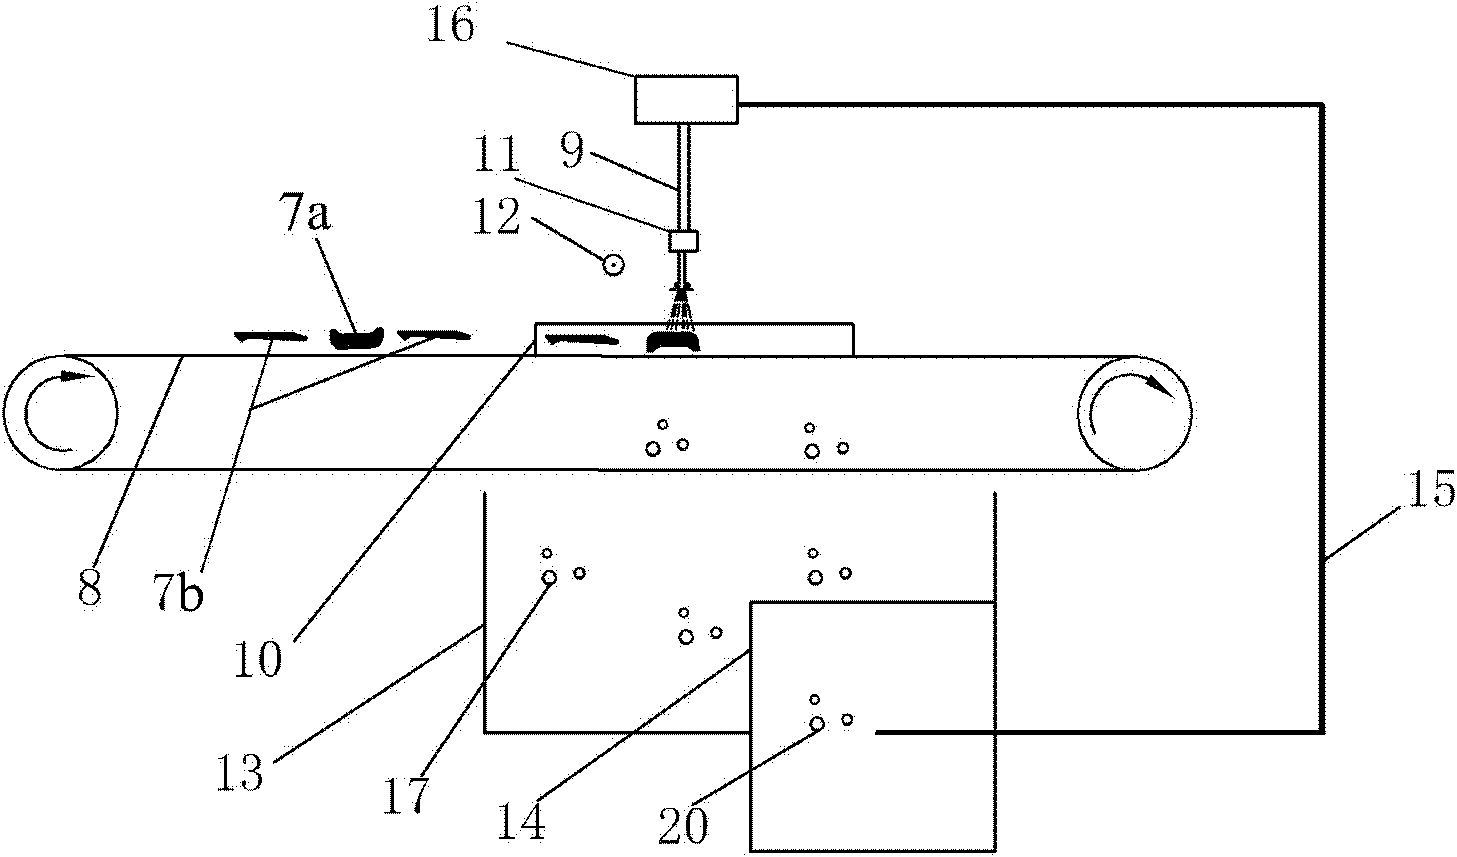 Method and device for industrialized recycling of waste tires based on ultra-high pressure water jet technology